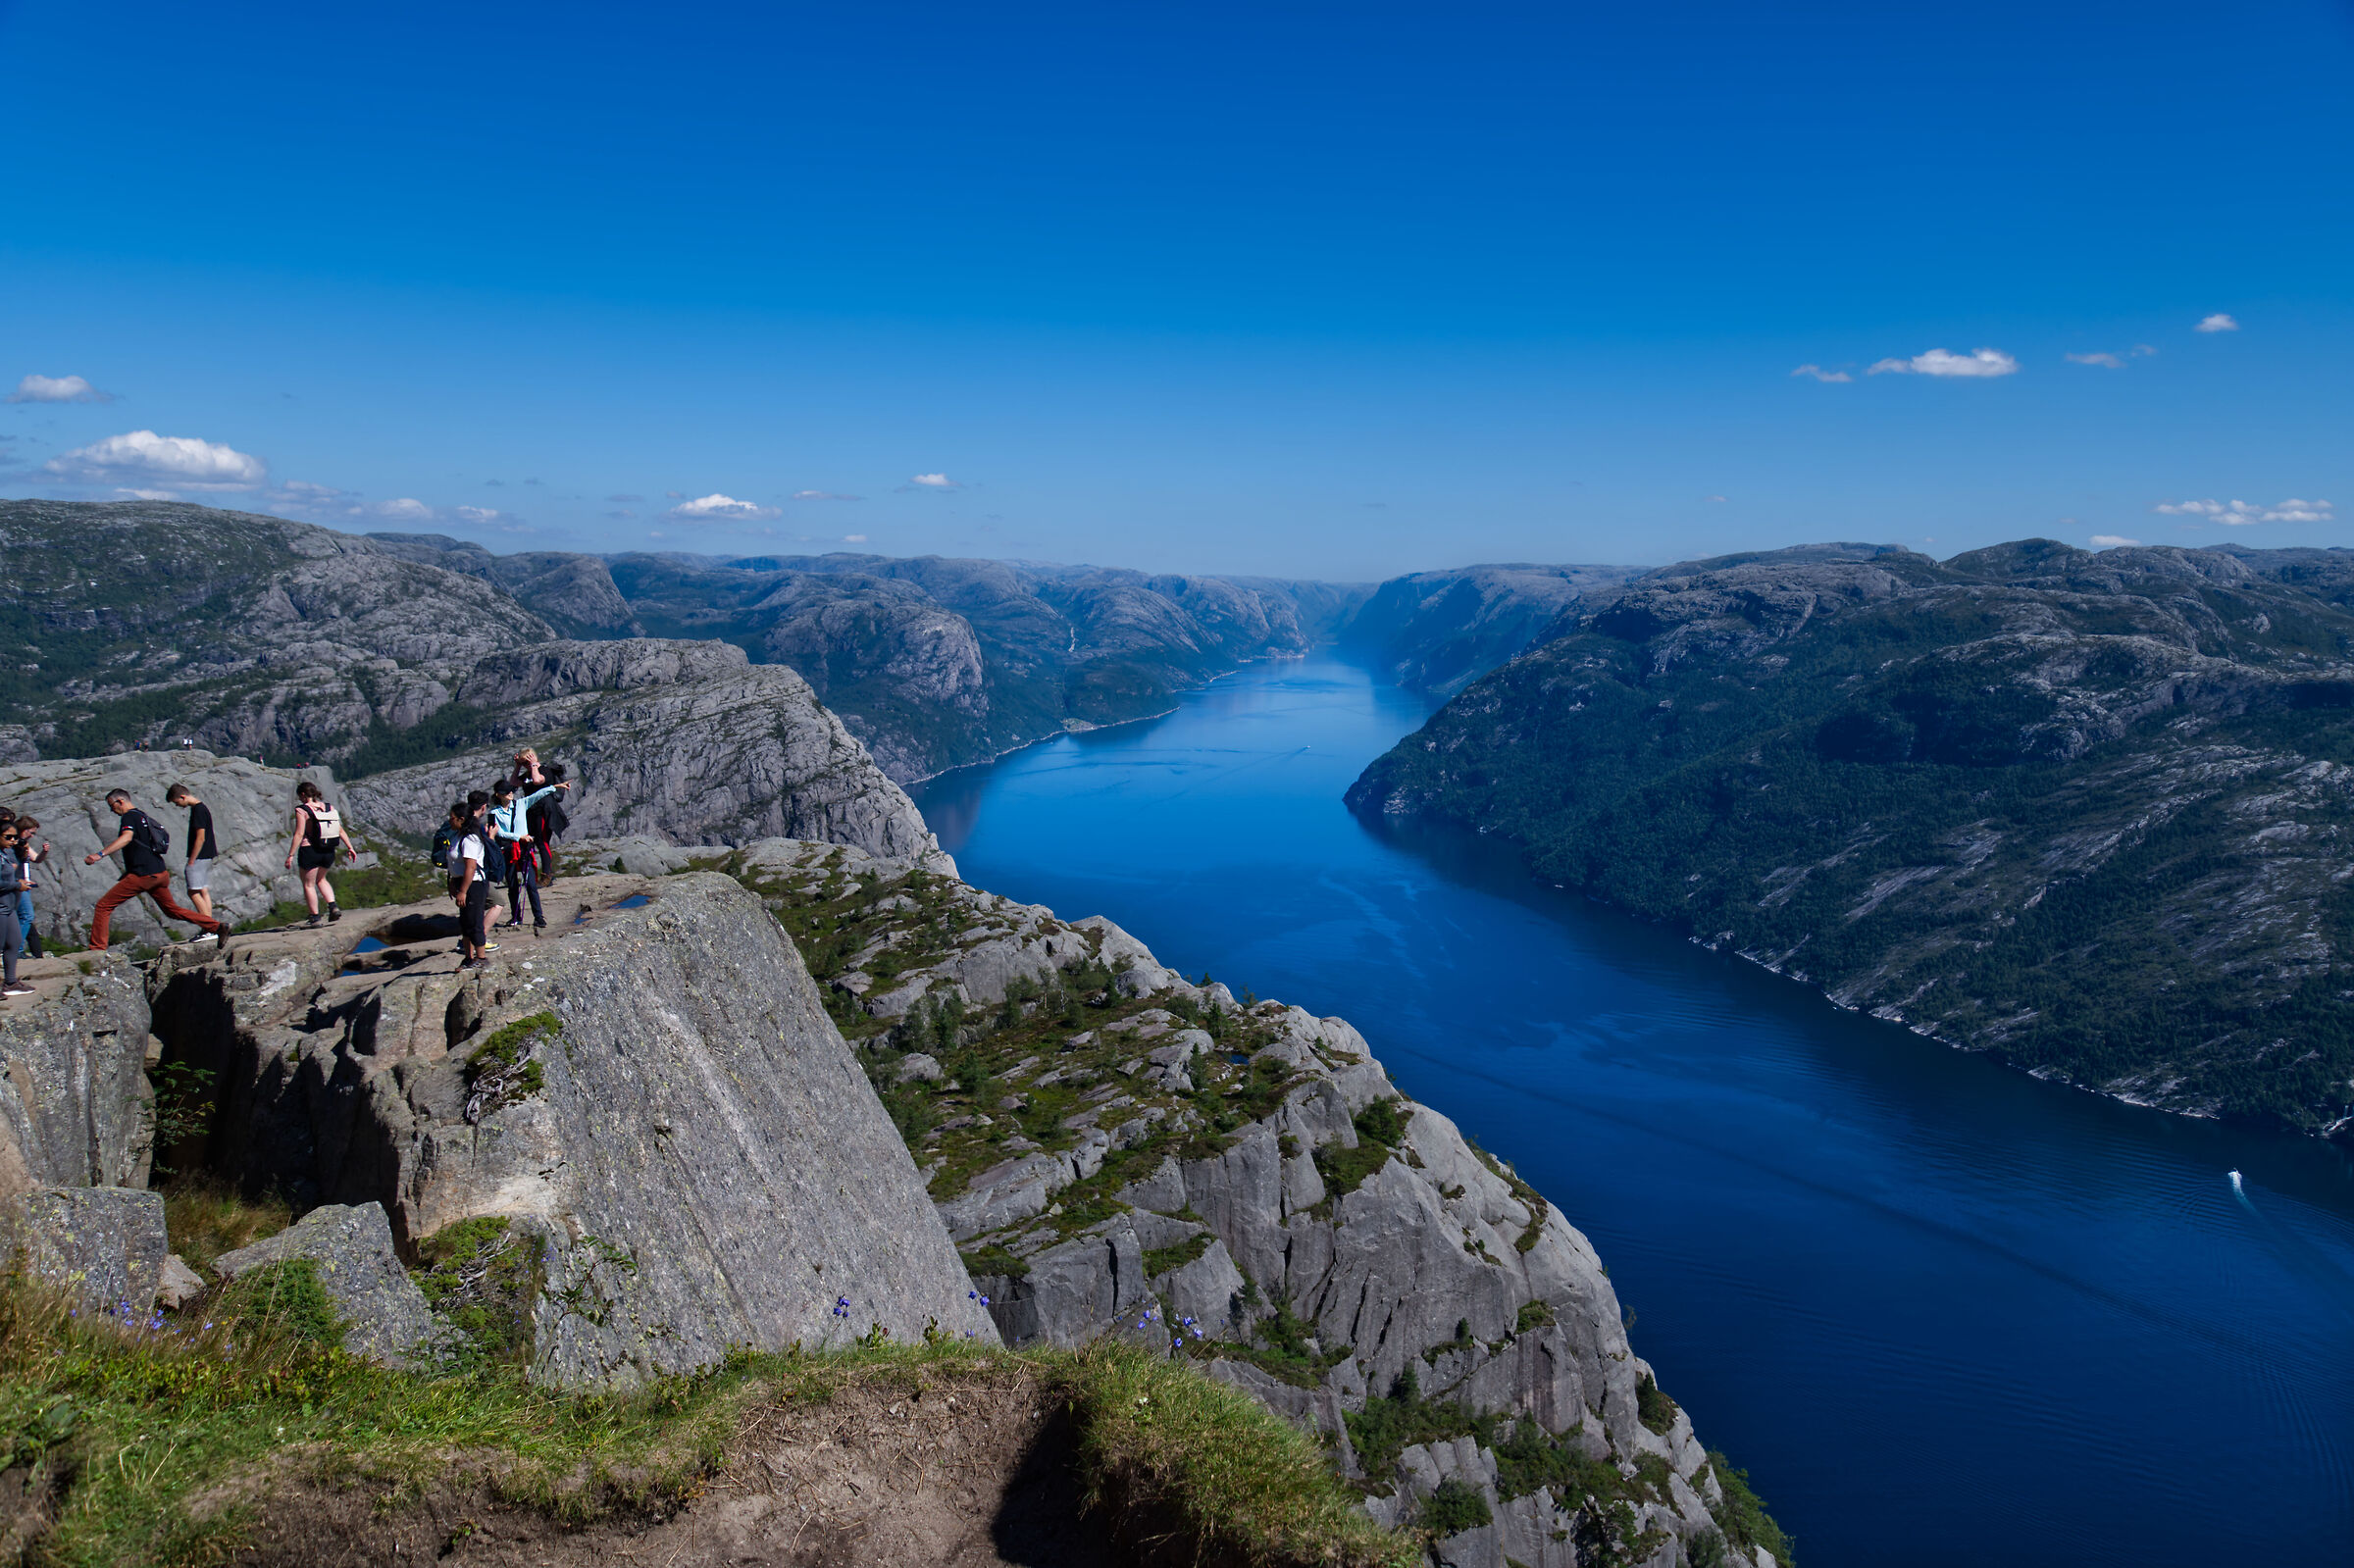 Overlooking the fjord...